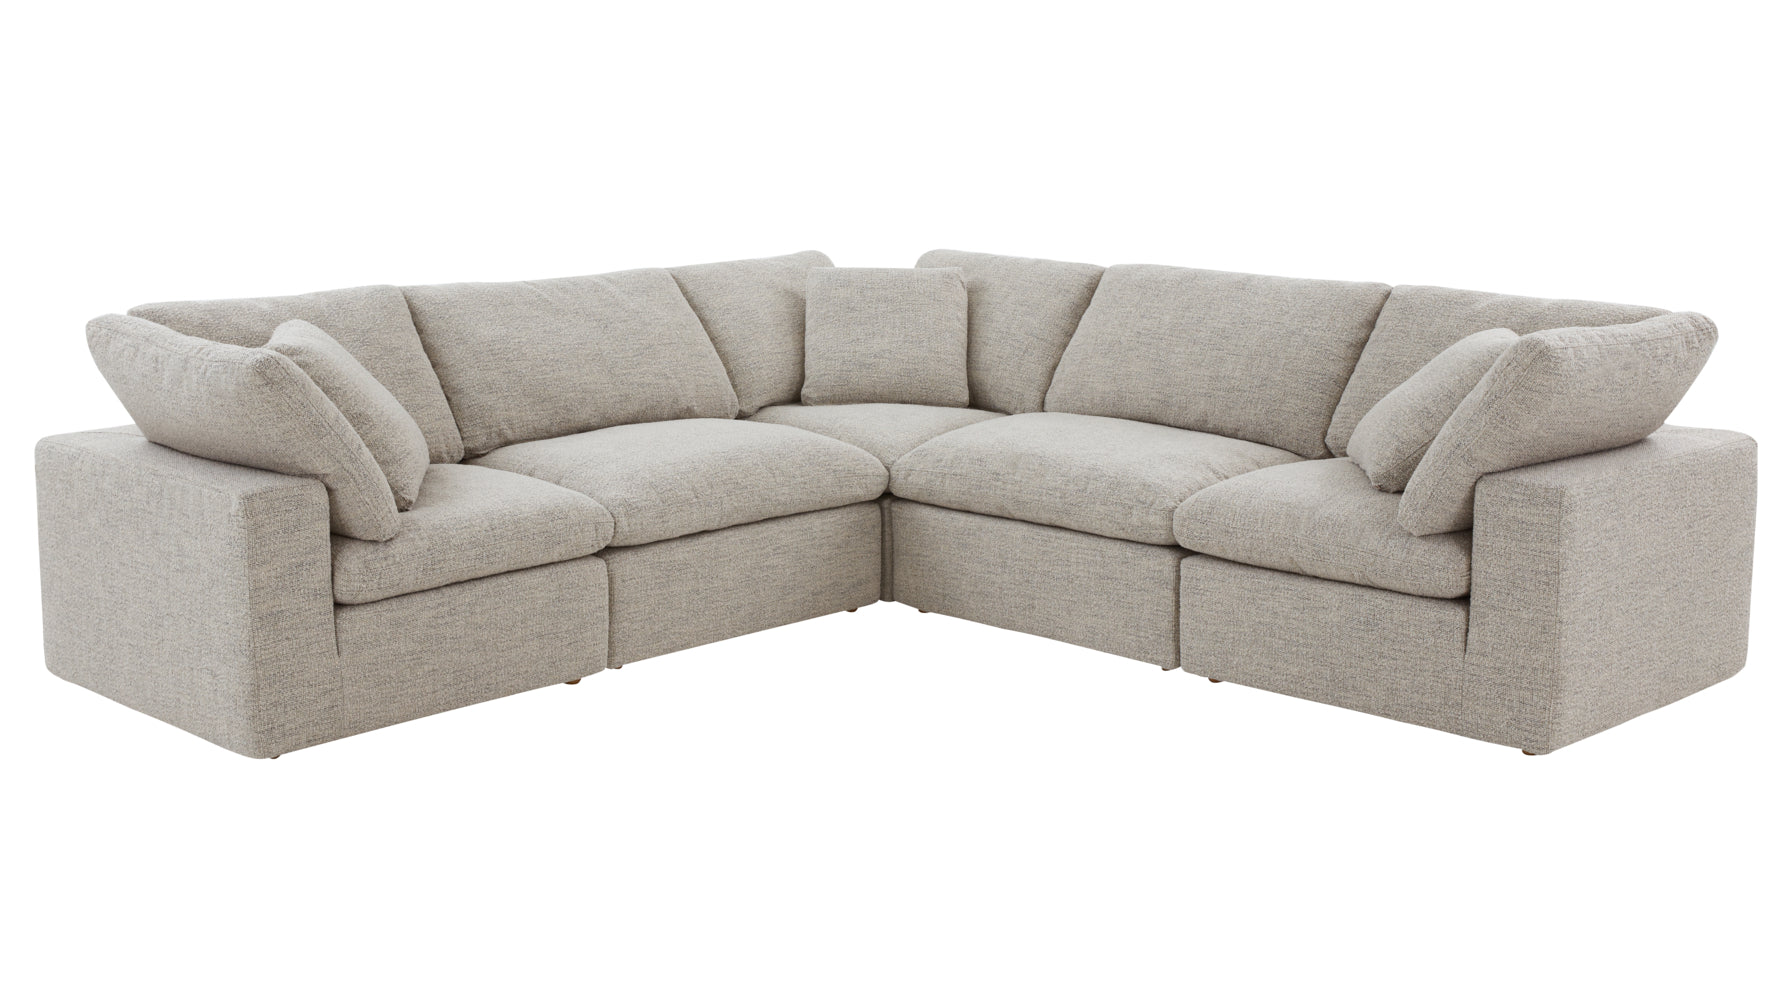 Movie Night™ 5-Piece Modular Sectional Closed, Large, Oatmeal - Image 3